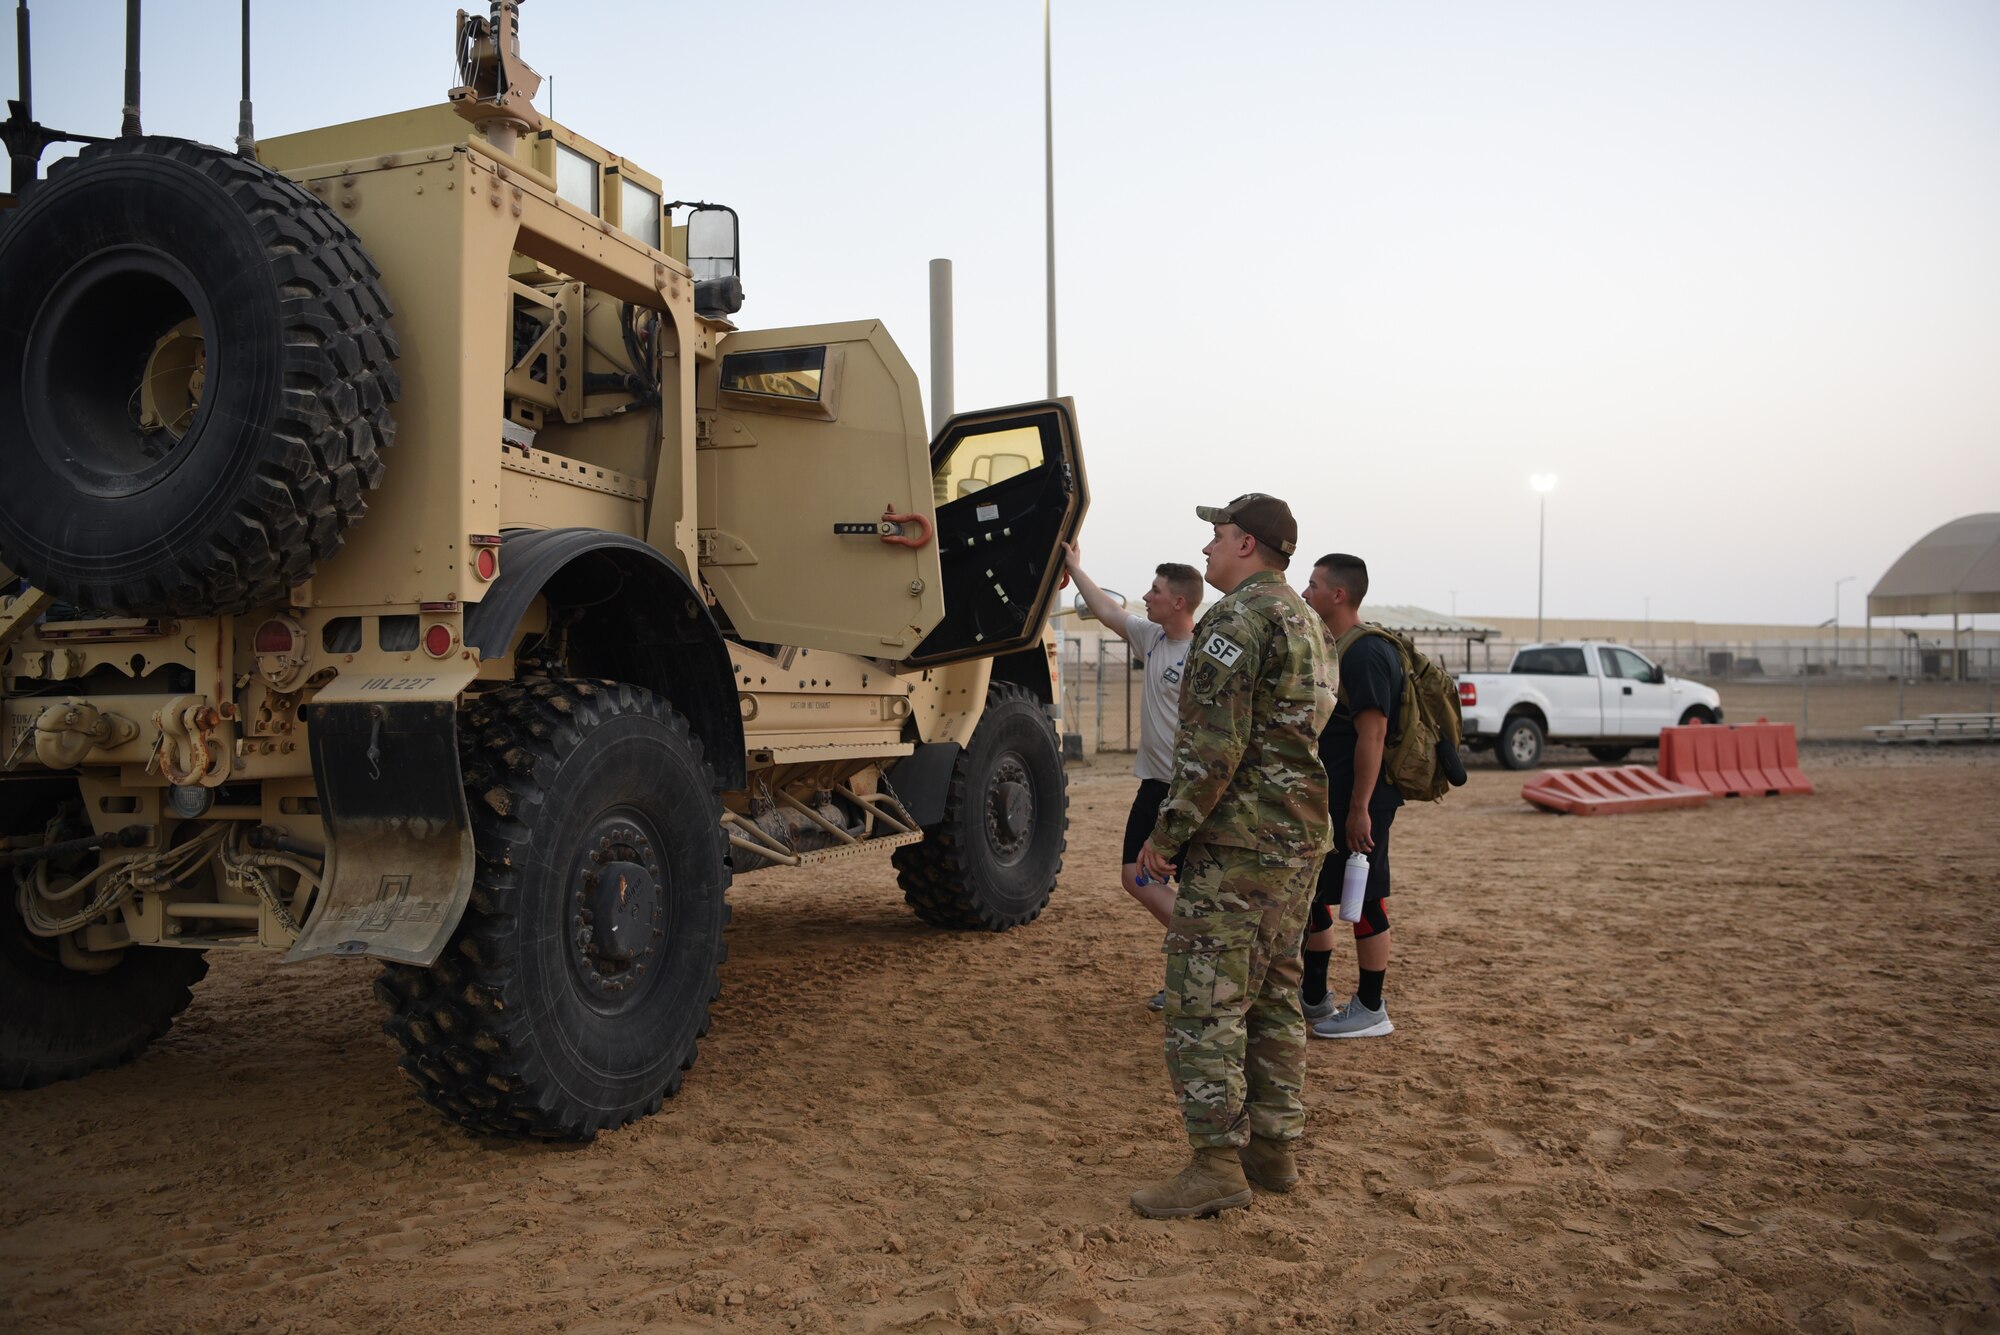 A 380th Expeditionary Security Forces Squadron member answers questions about the Mine Resistant Ambush Protected vehicle displayed during Police Week 2019, May 13, 2019, at Al Dhafra Air Base, United Arab Emirates.